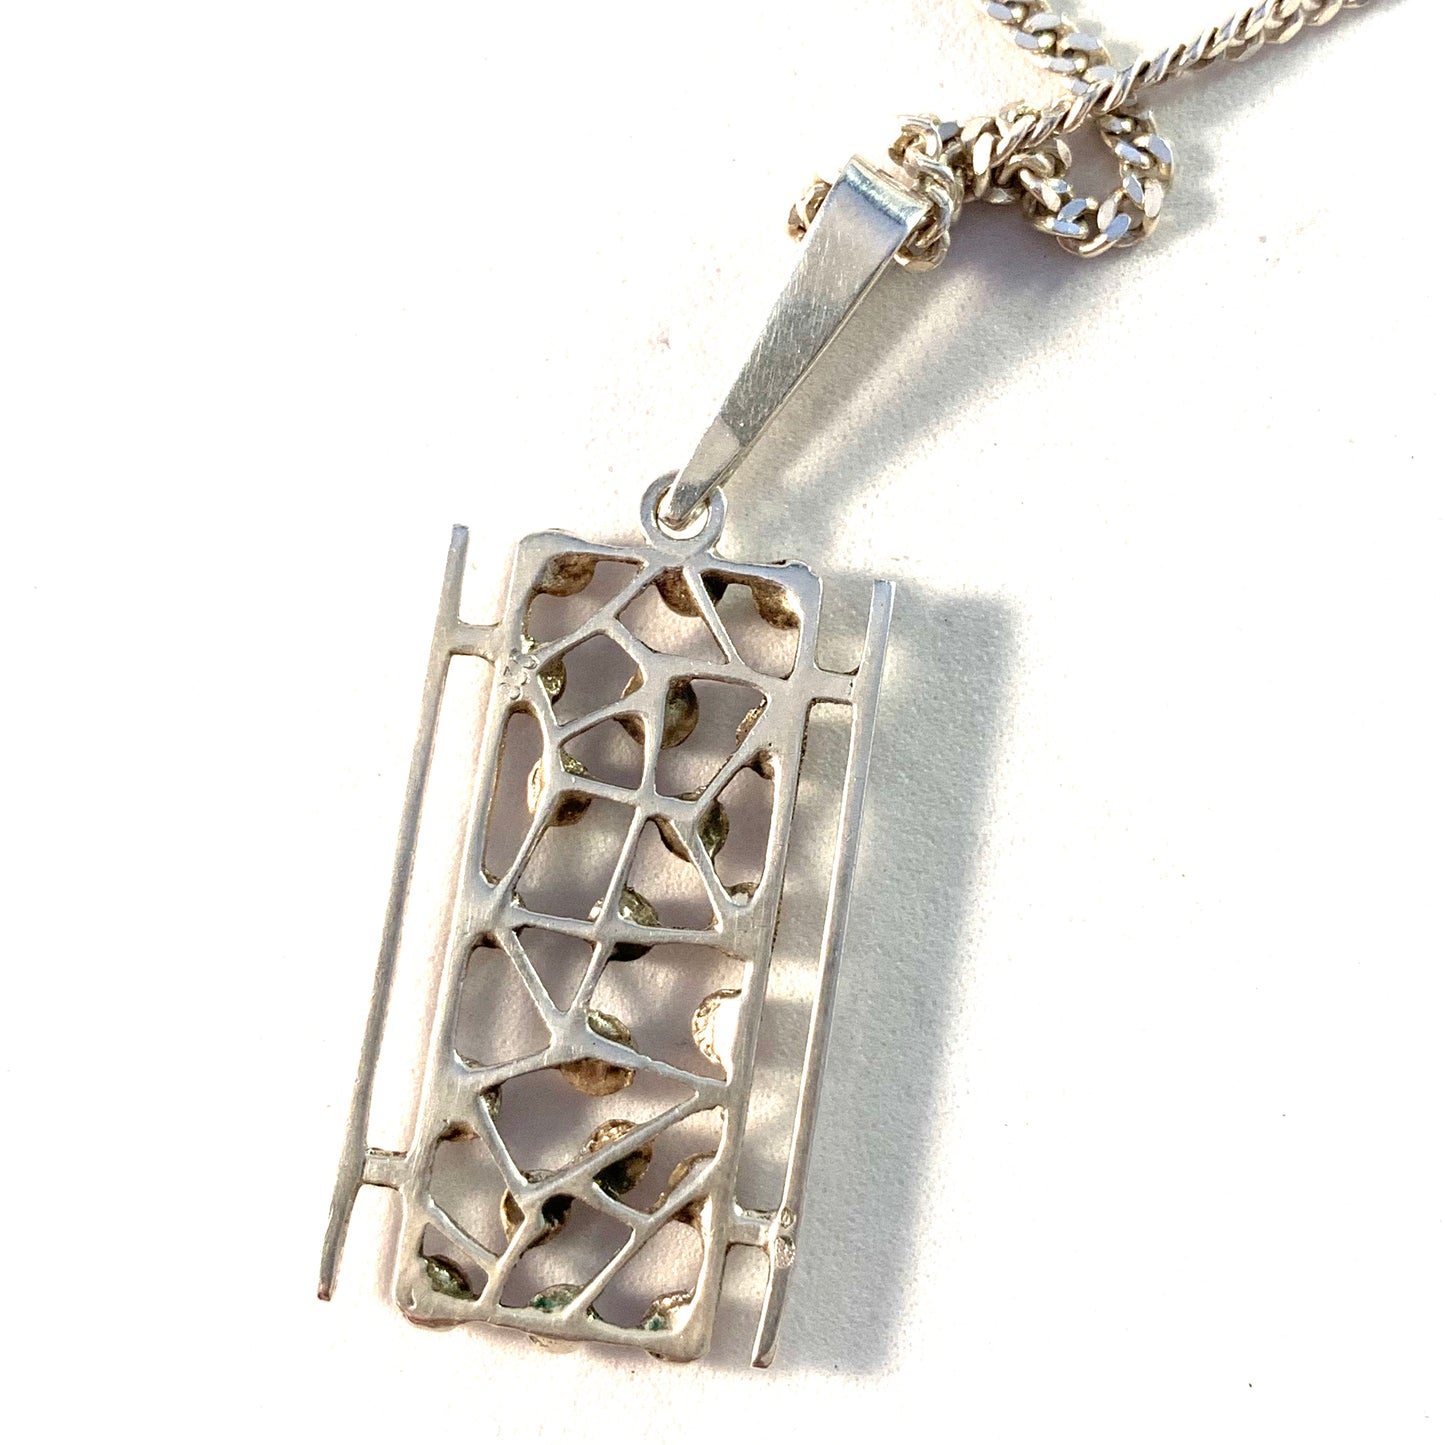 Italy 1970s Modernist Sterling Silver Pendant Necklace.